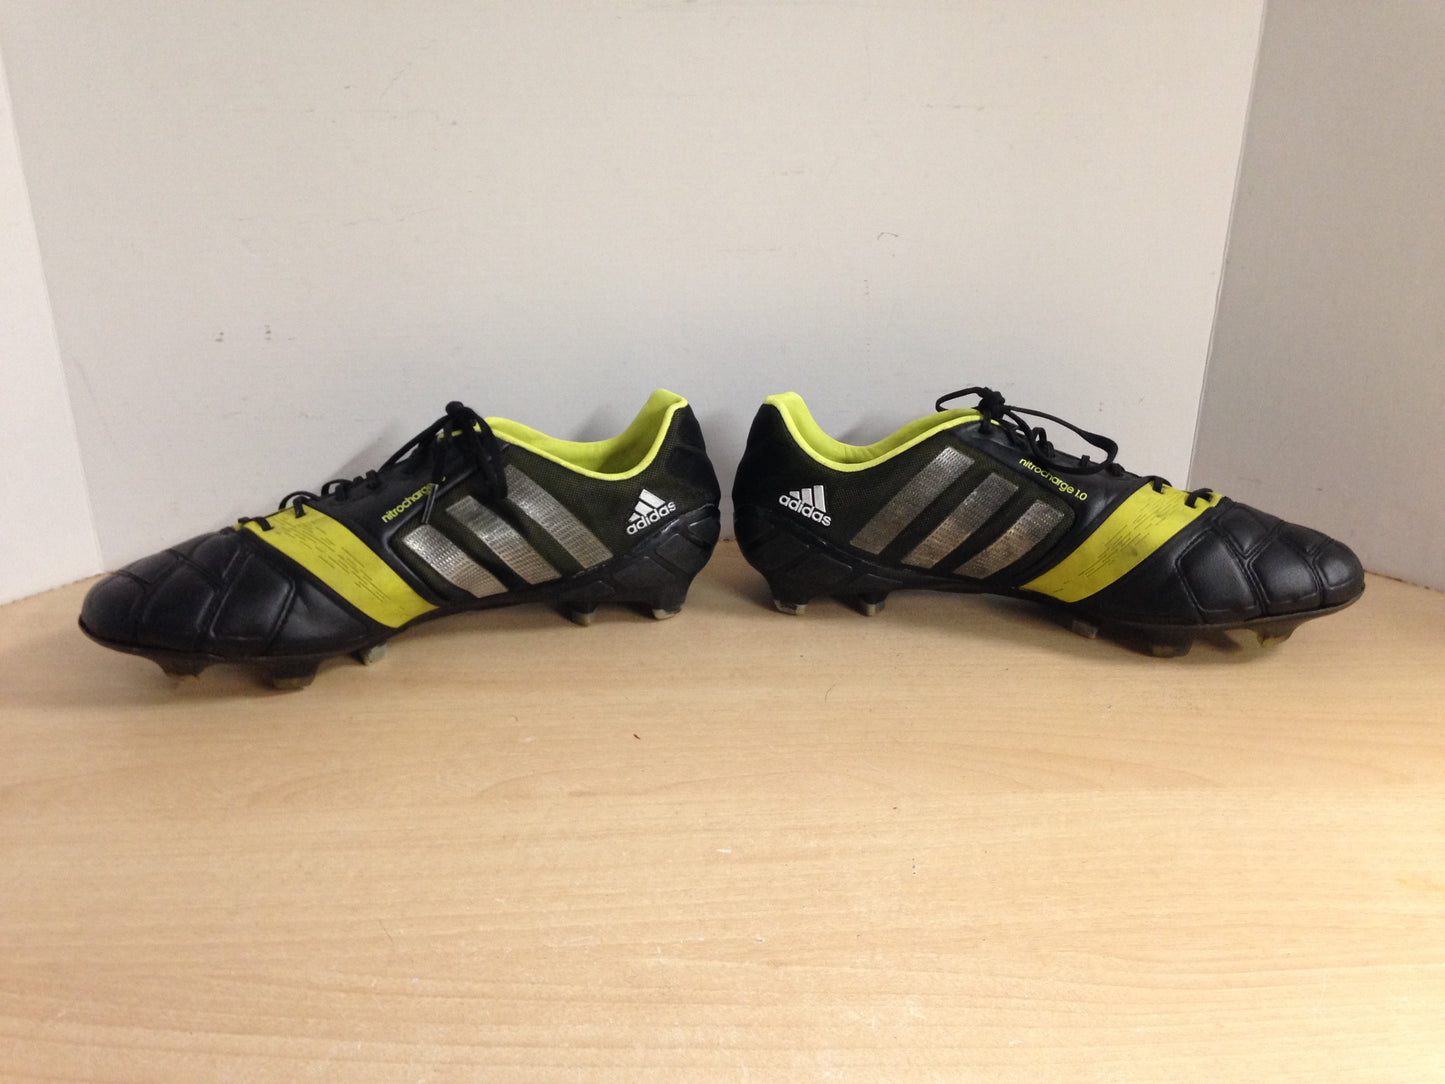 Soccer Shoes Cleats Men's Size 11.5 Adidas Nitrocharge Black and Lime